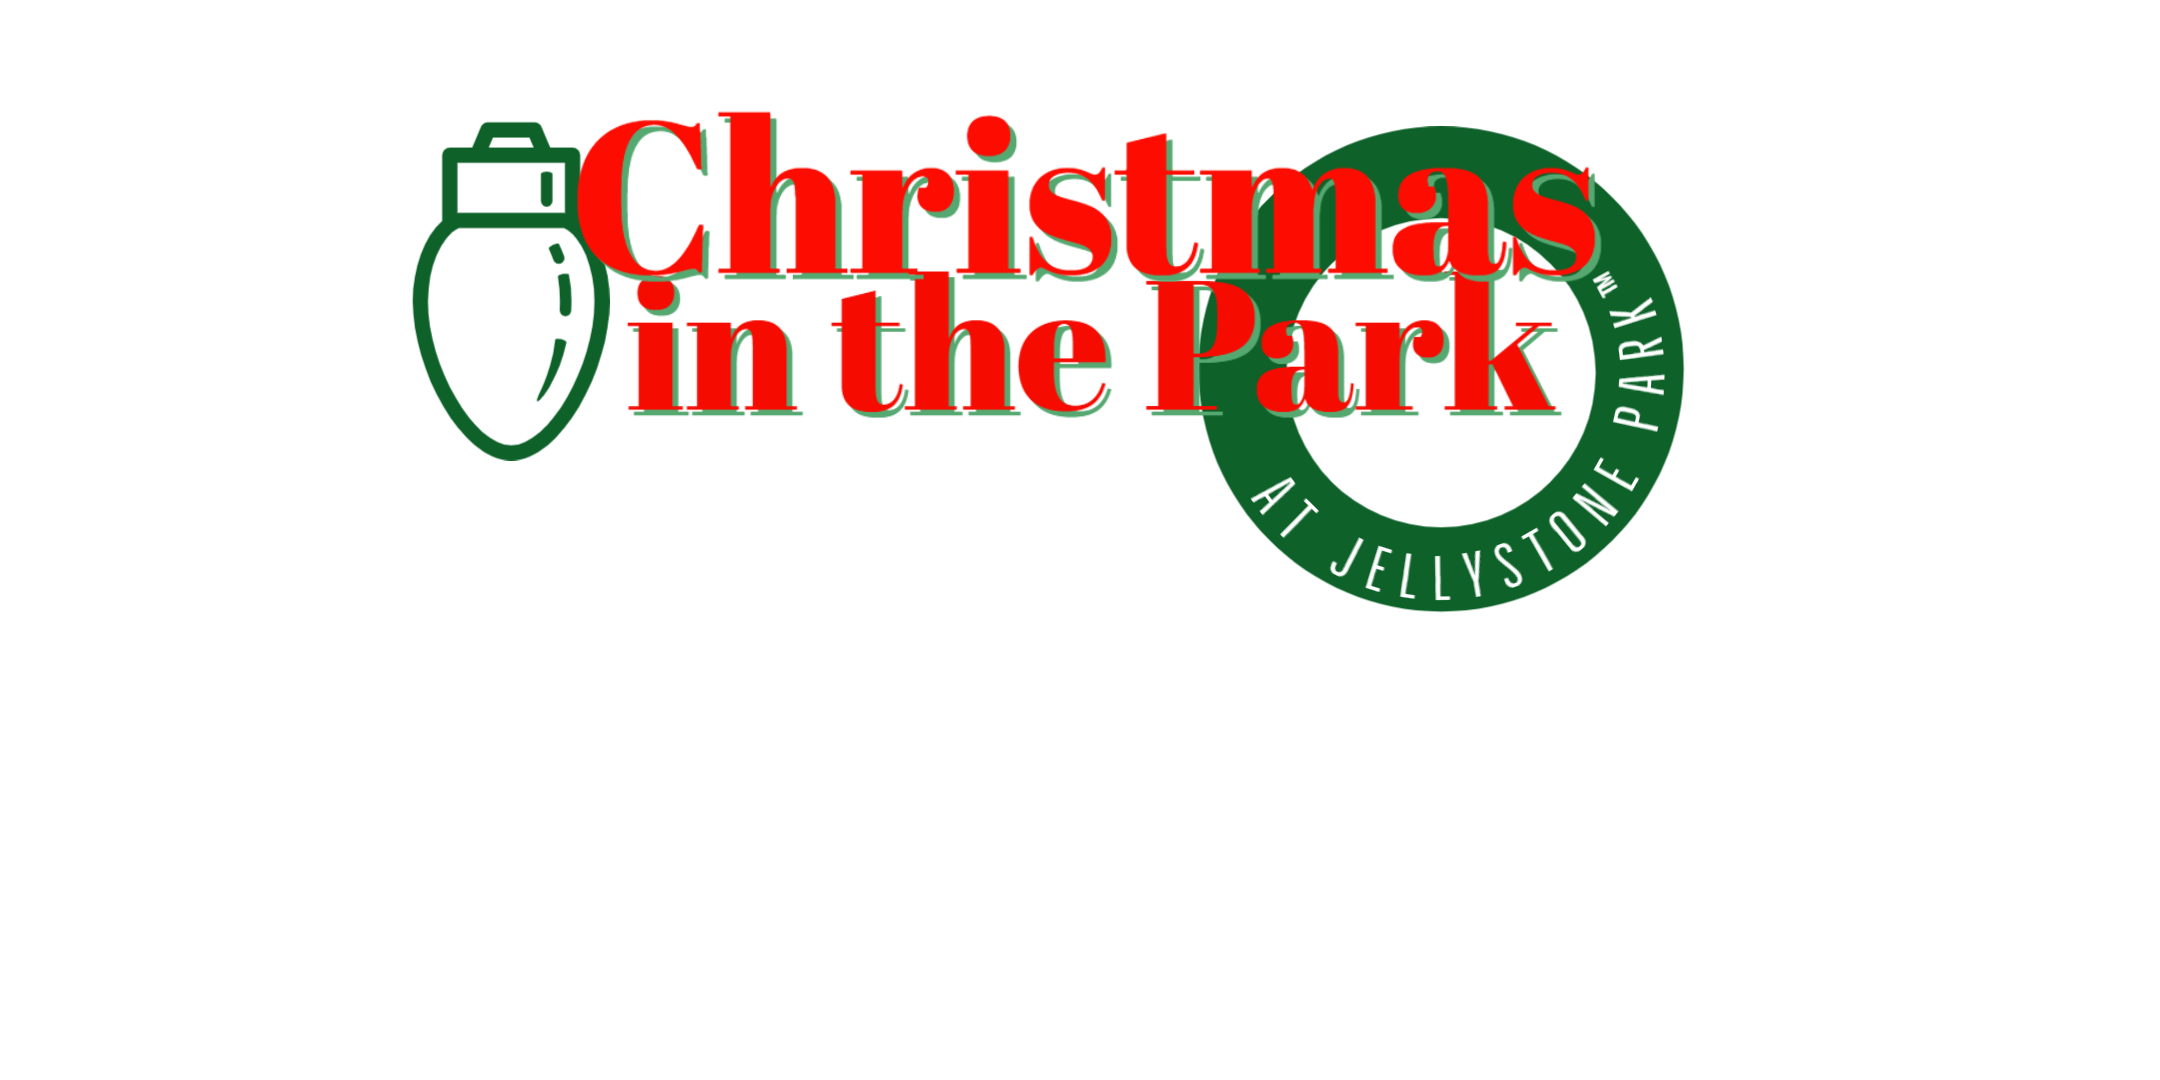 CHRISTMAS IN THE PARK